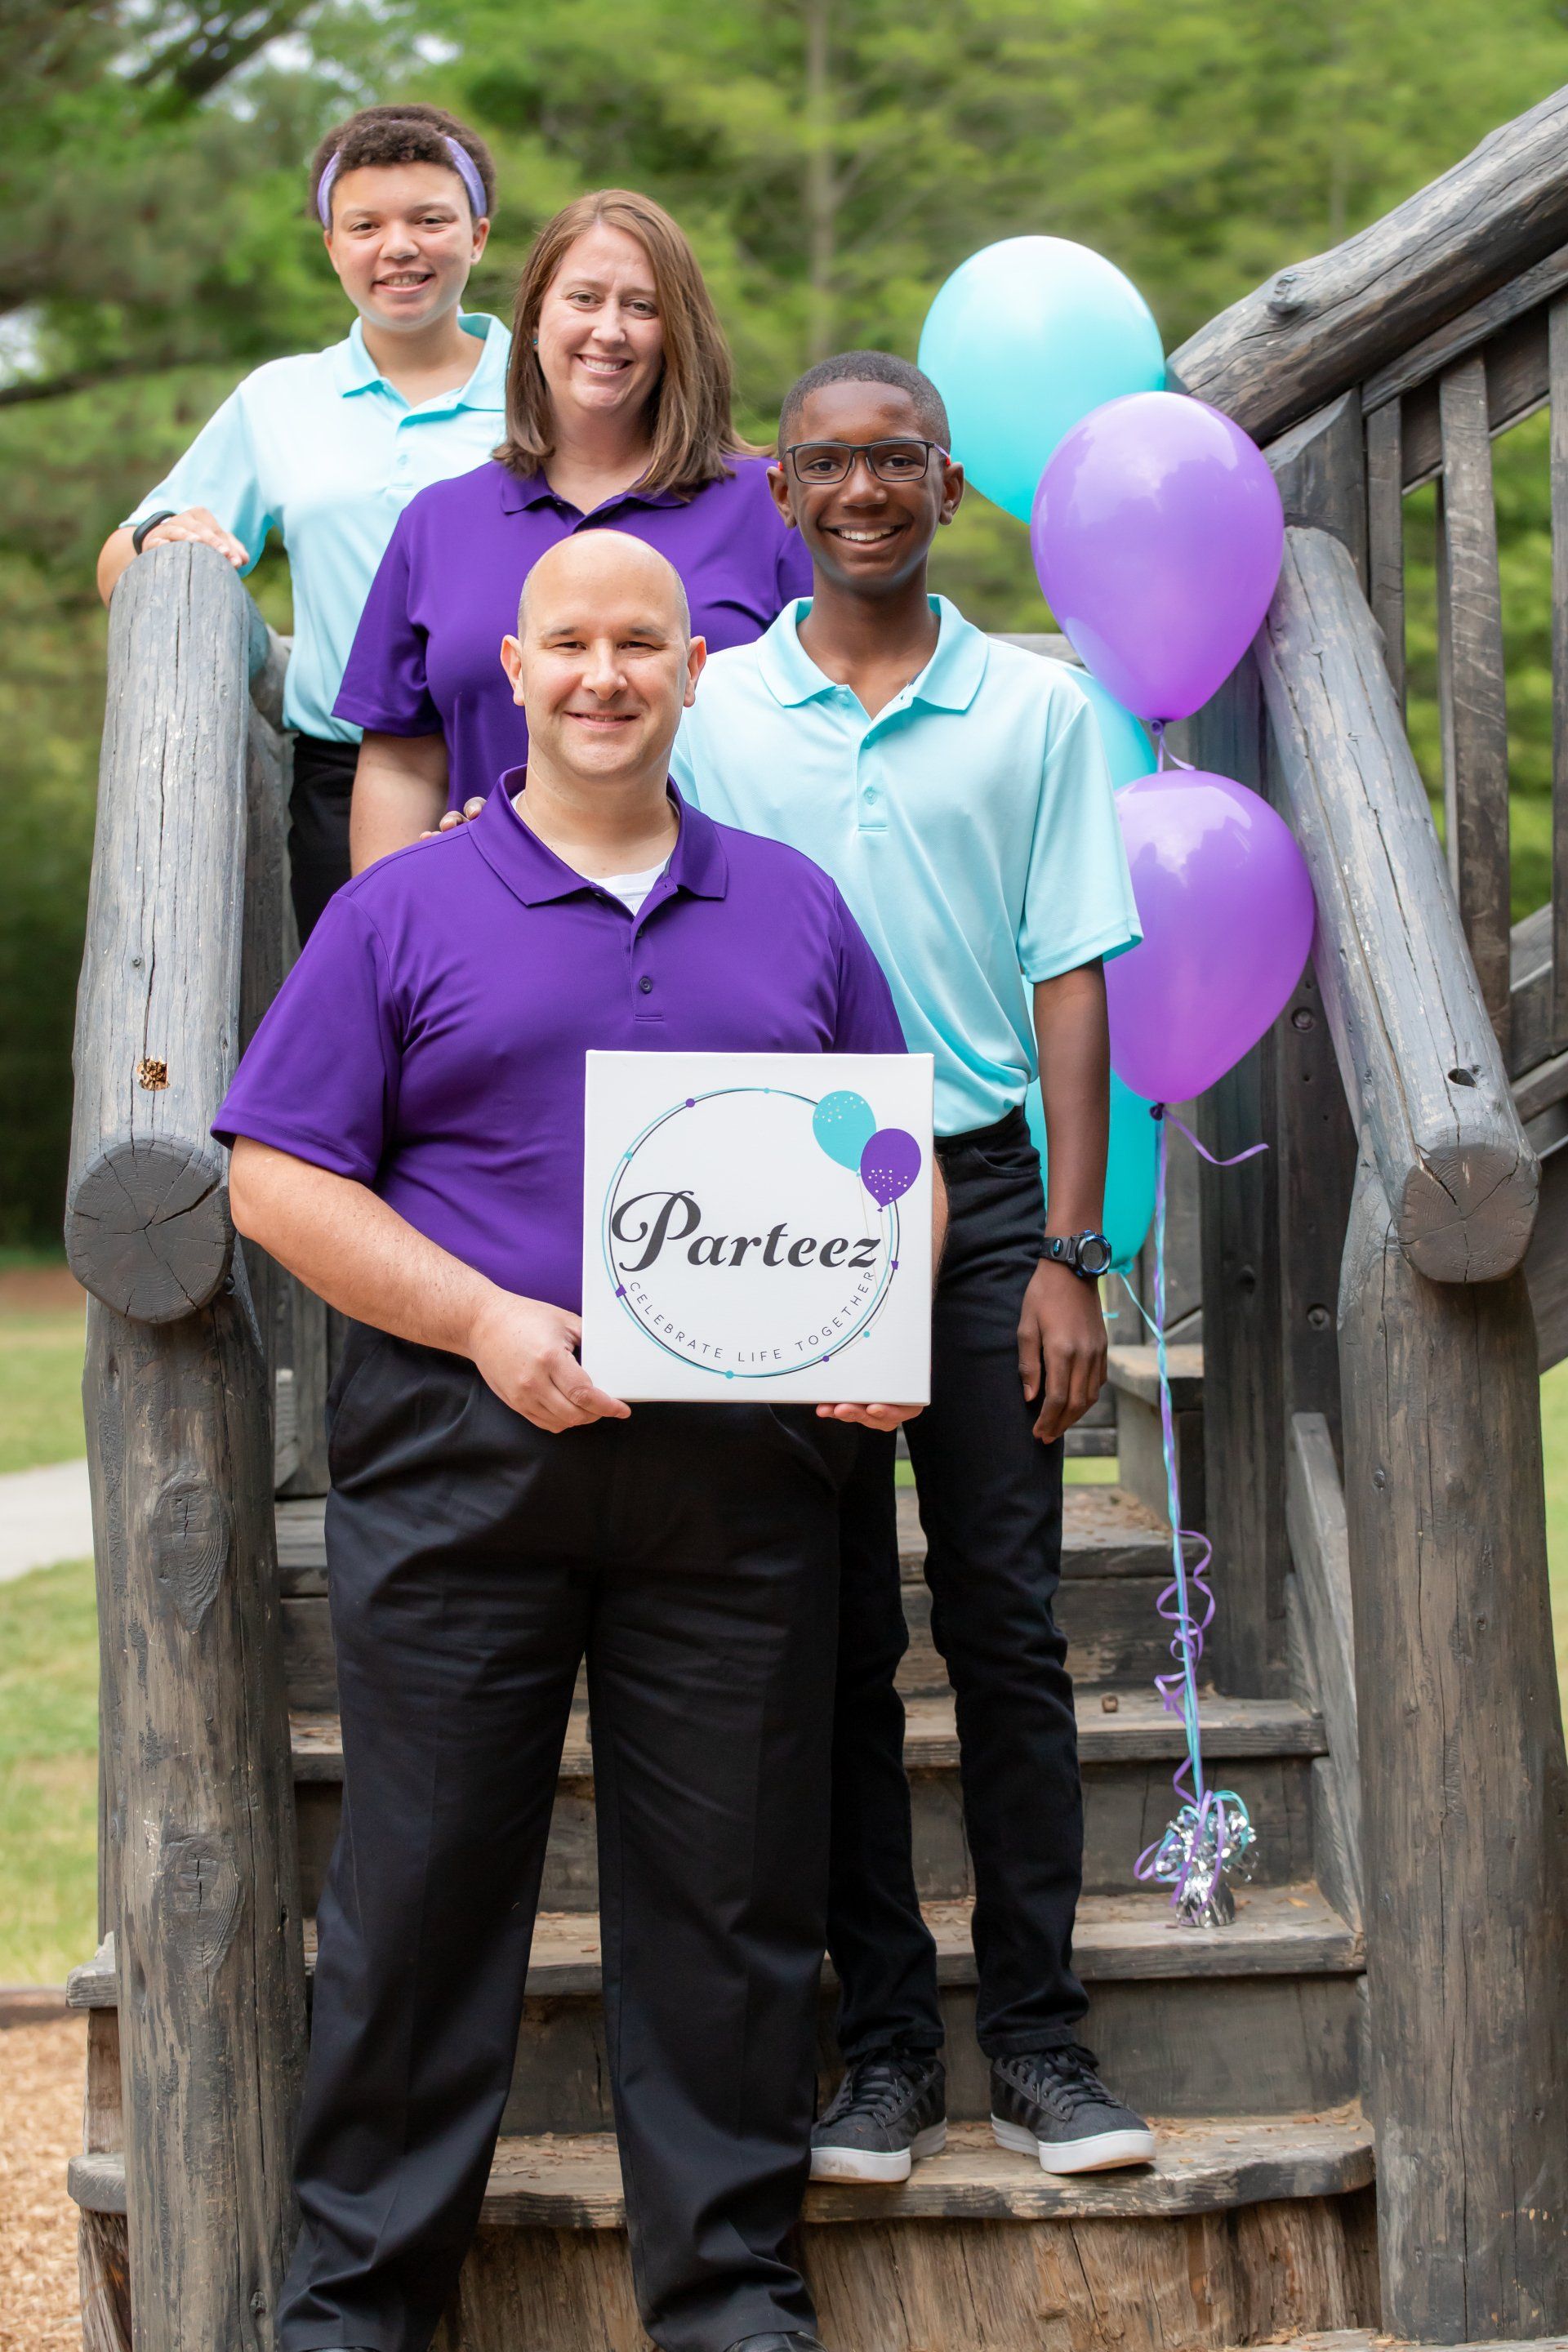 Photo of David, Patricia, Jennica and Micah on wooden stairs with teal and purple balloons symbolizing the Parteez logo